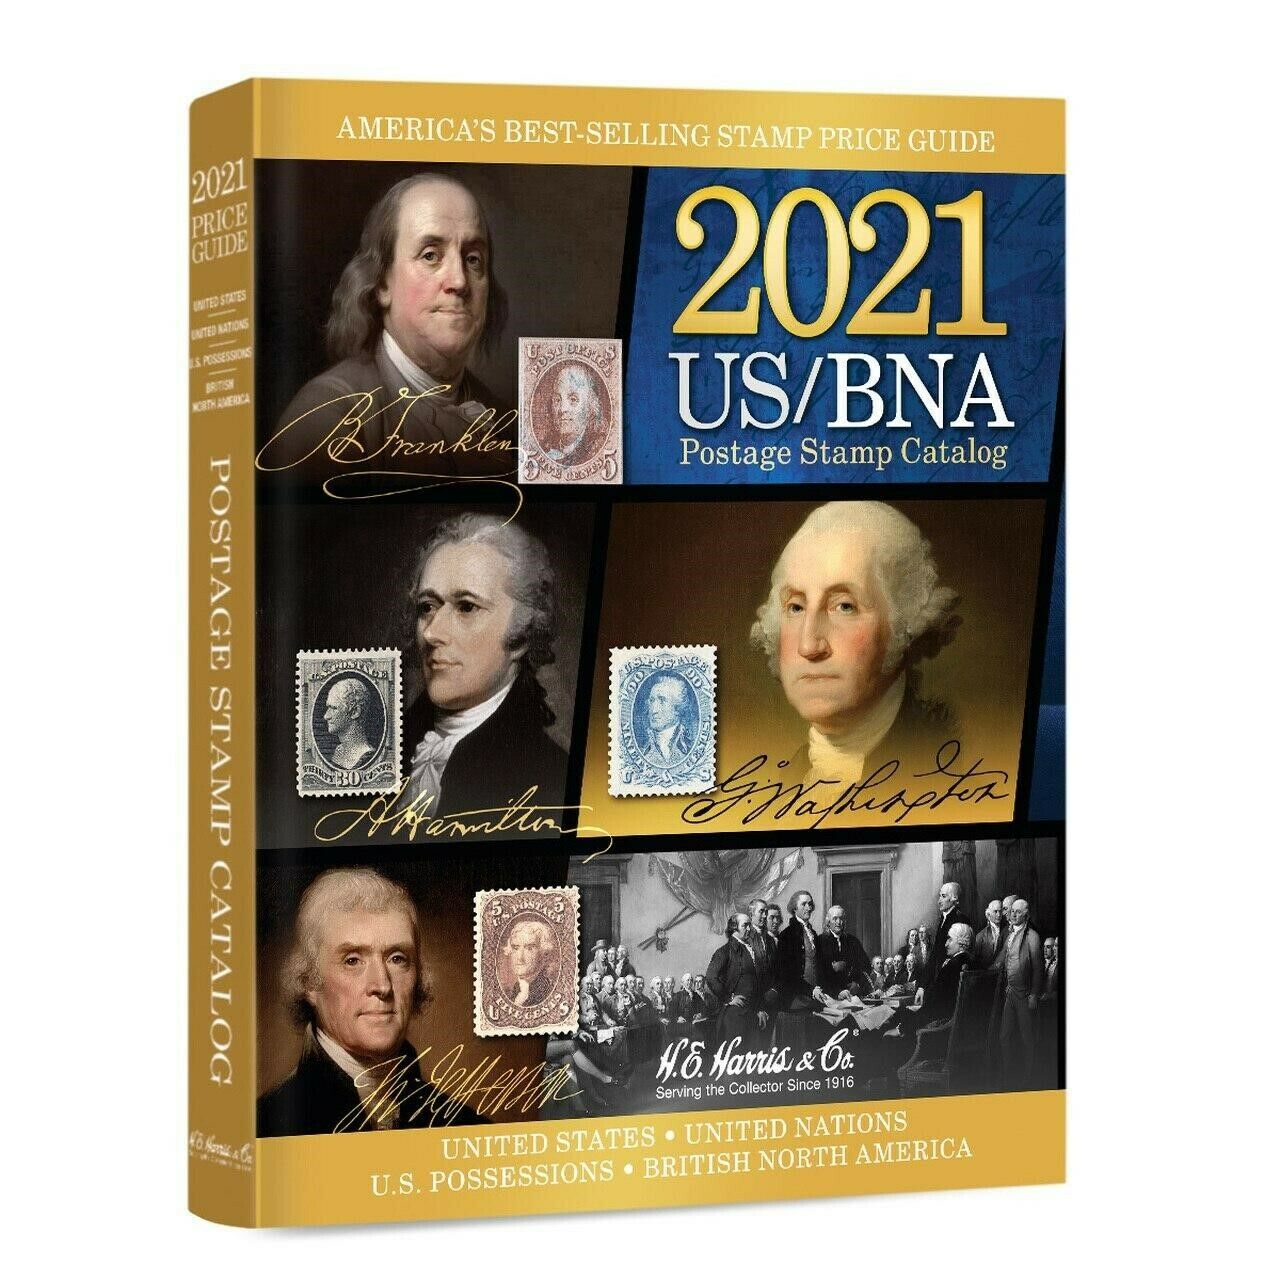 New 2021 Us / Bna Postage Stamp Catalog Best Price List Usa Collector Guide Book